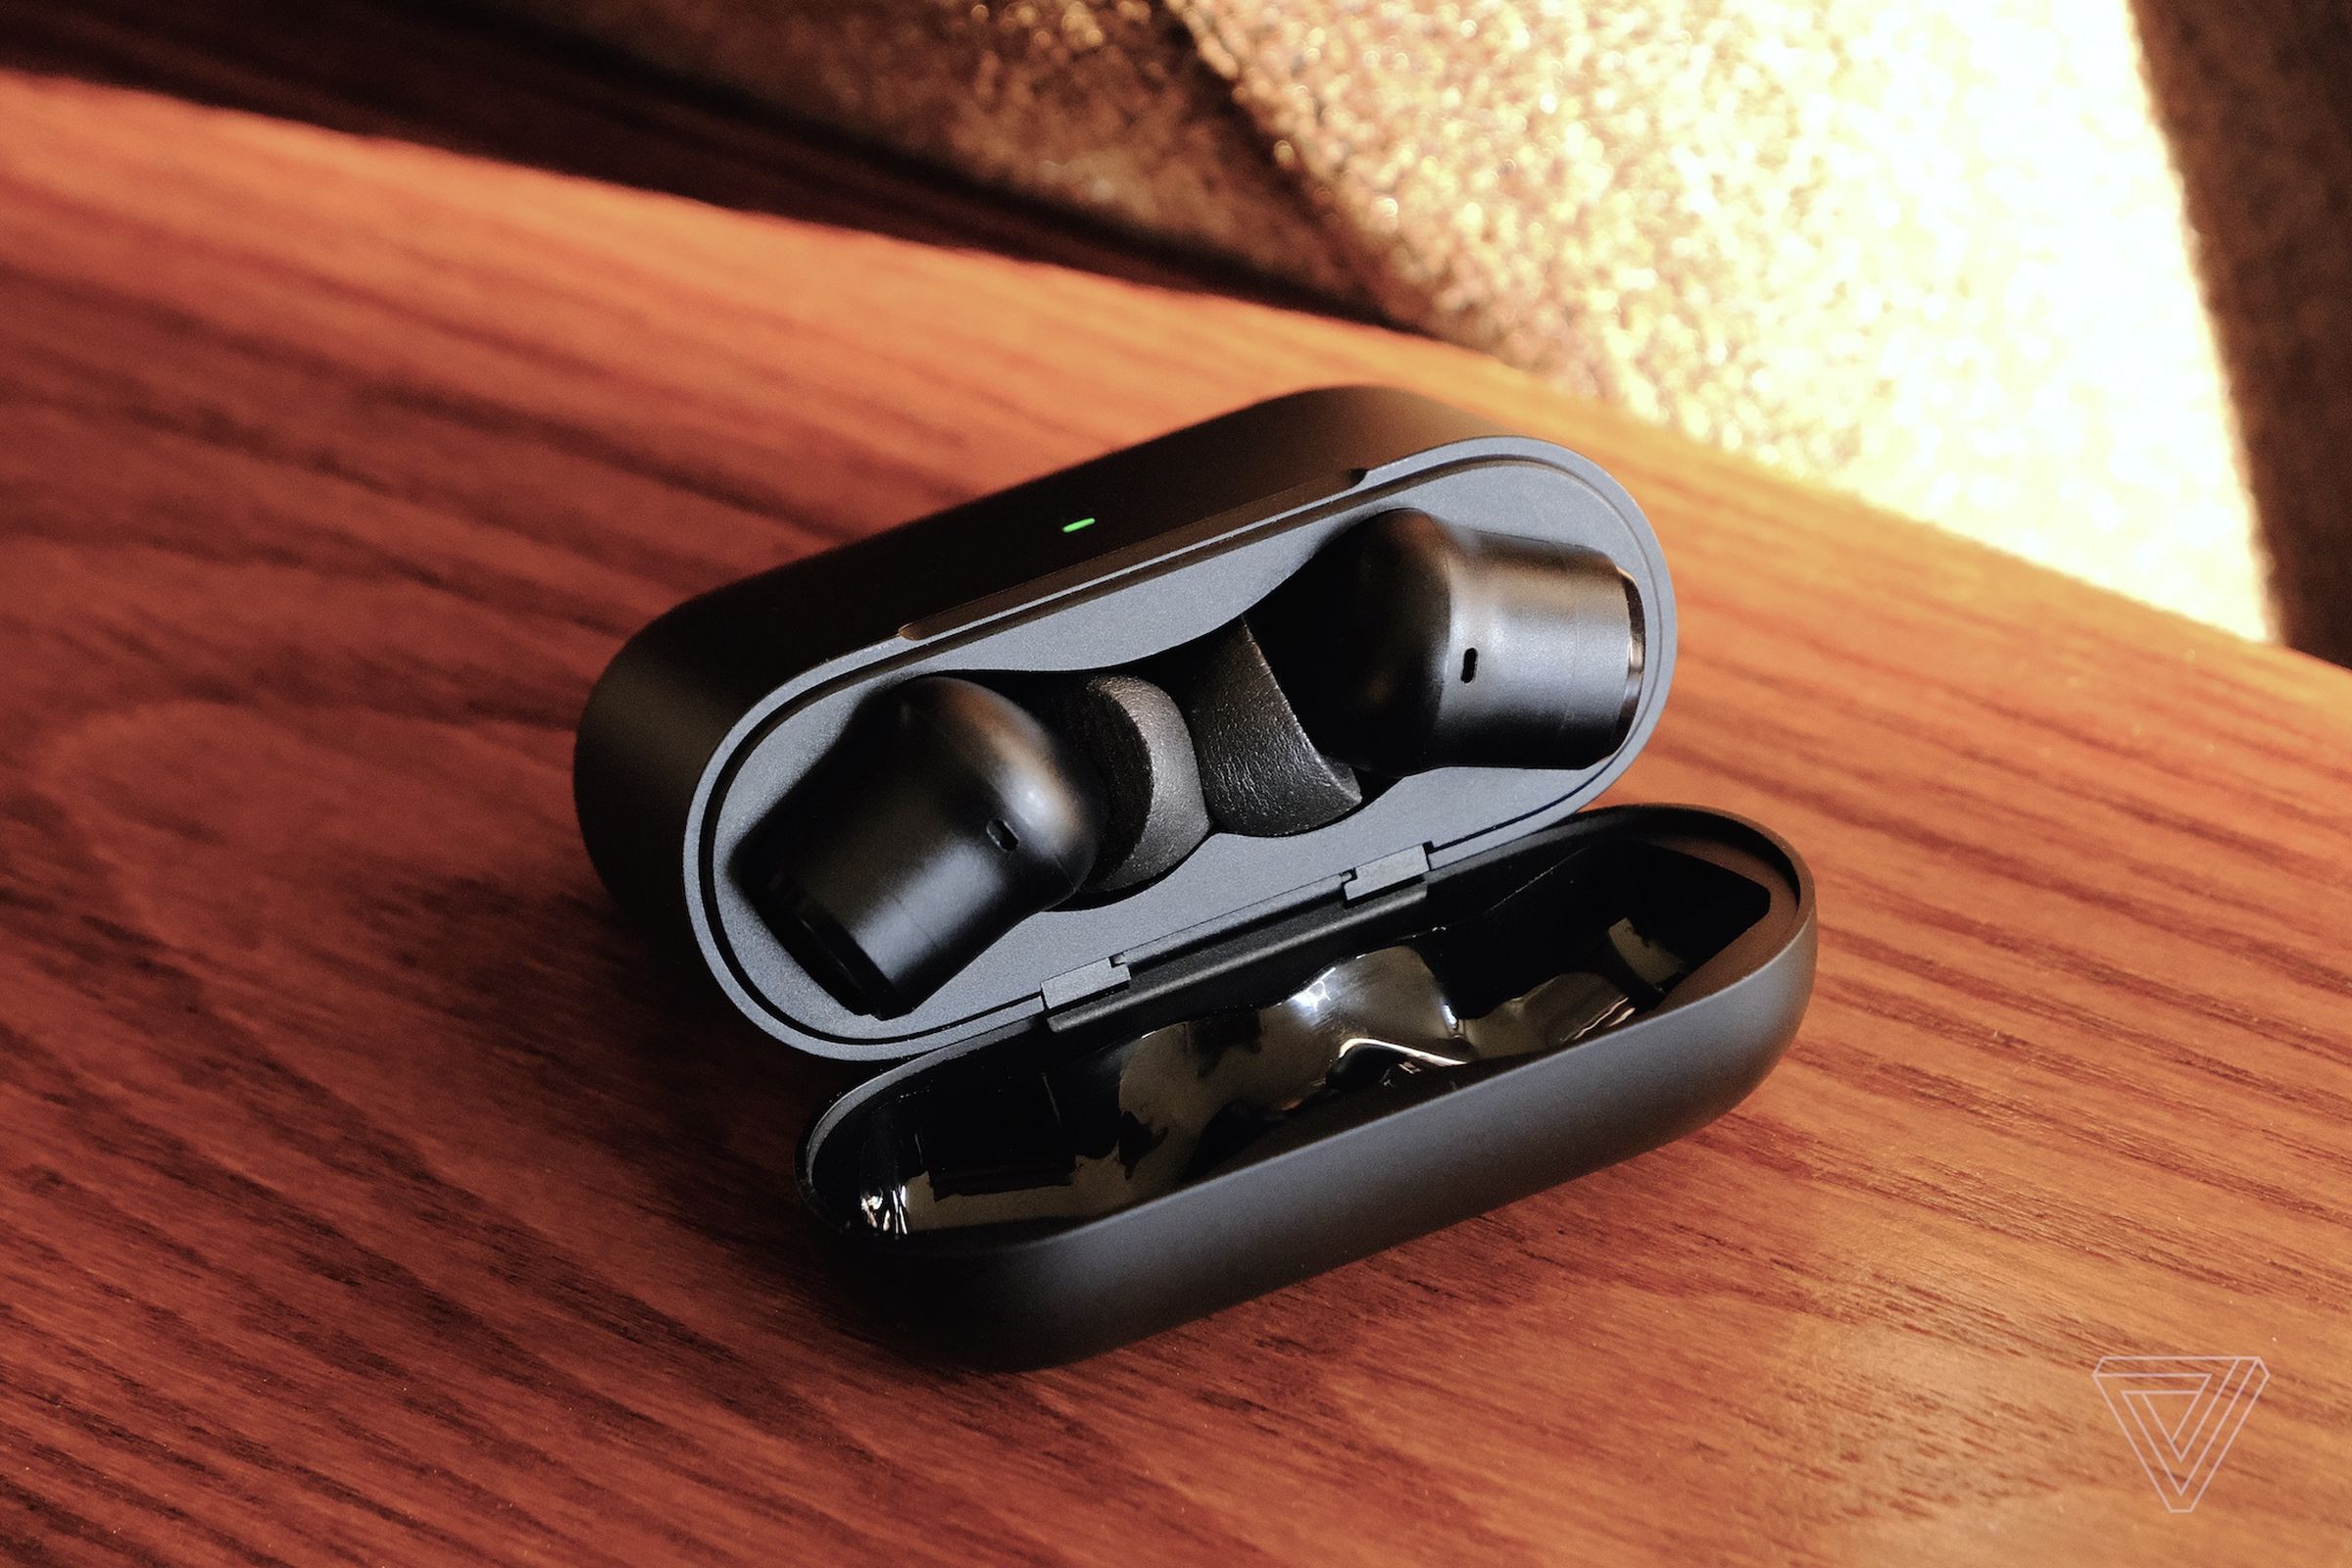 These earbuds would be much more compelling at a lower price.